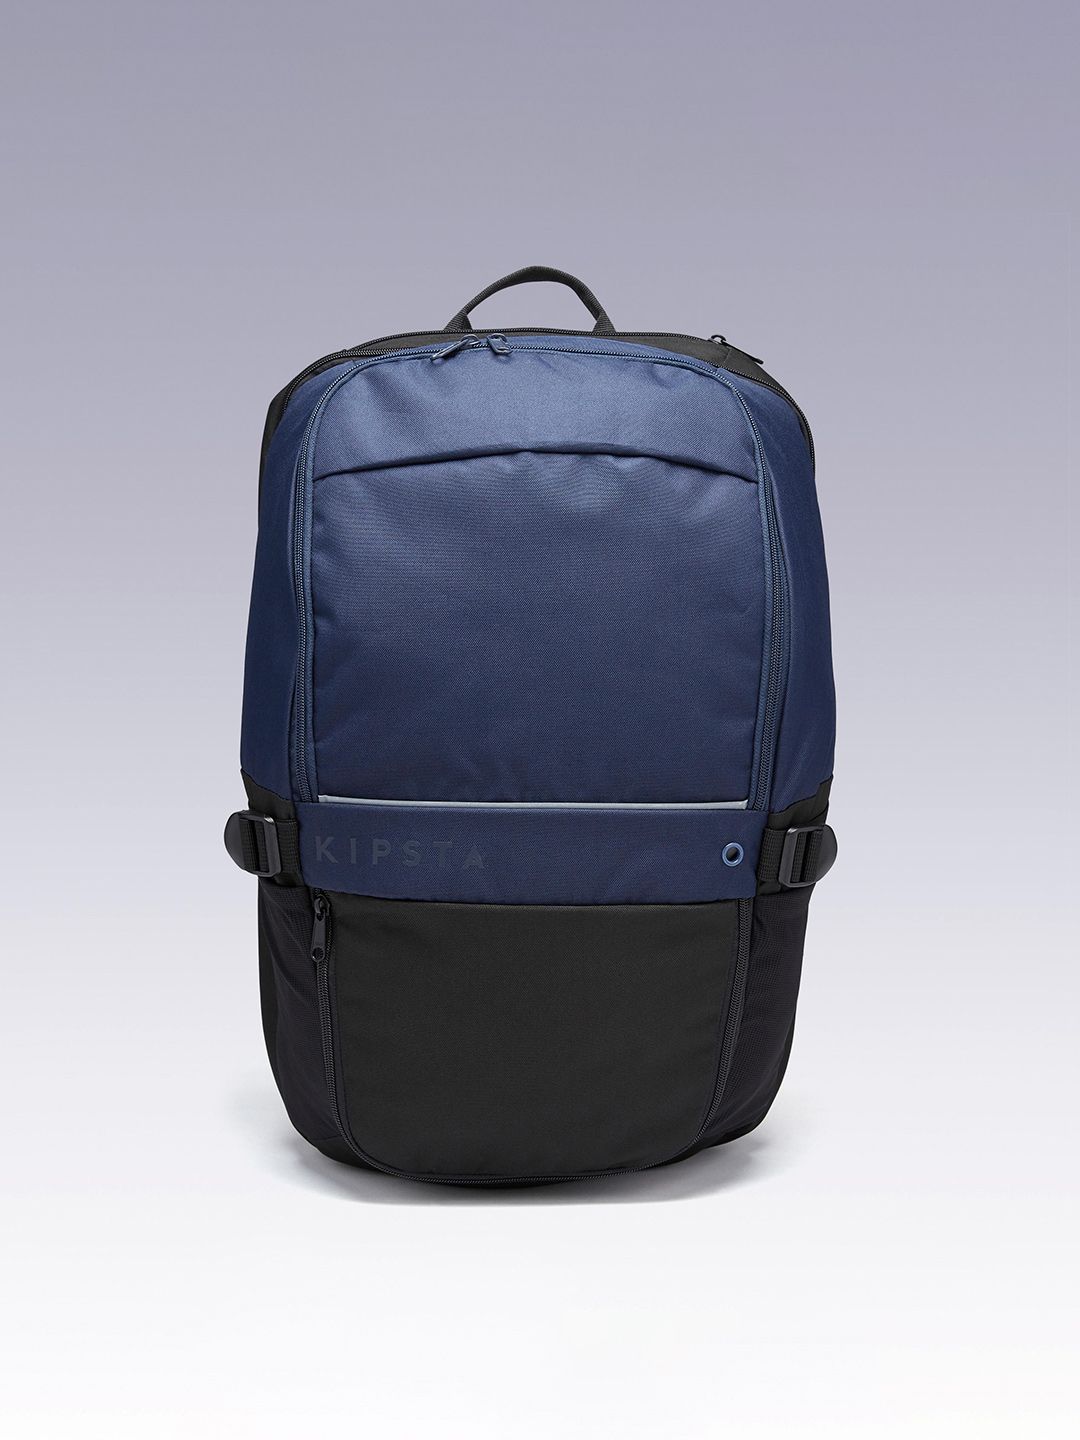 Kipsta By Decathlon Unisex Blue & Black Colourblocked Backpack with Shoe Pocket Price in India